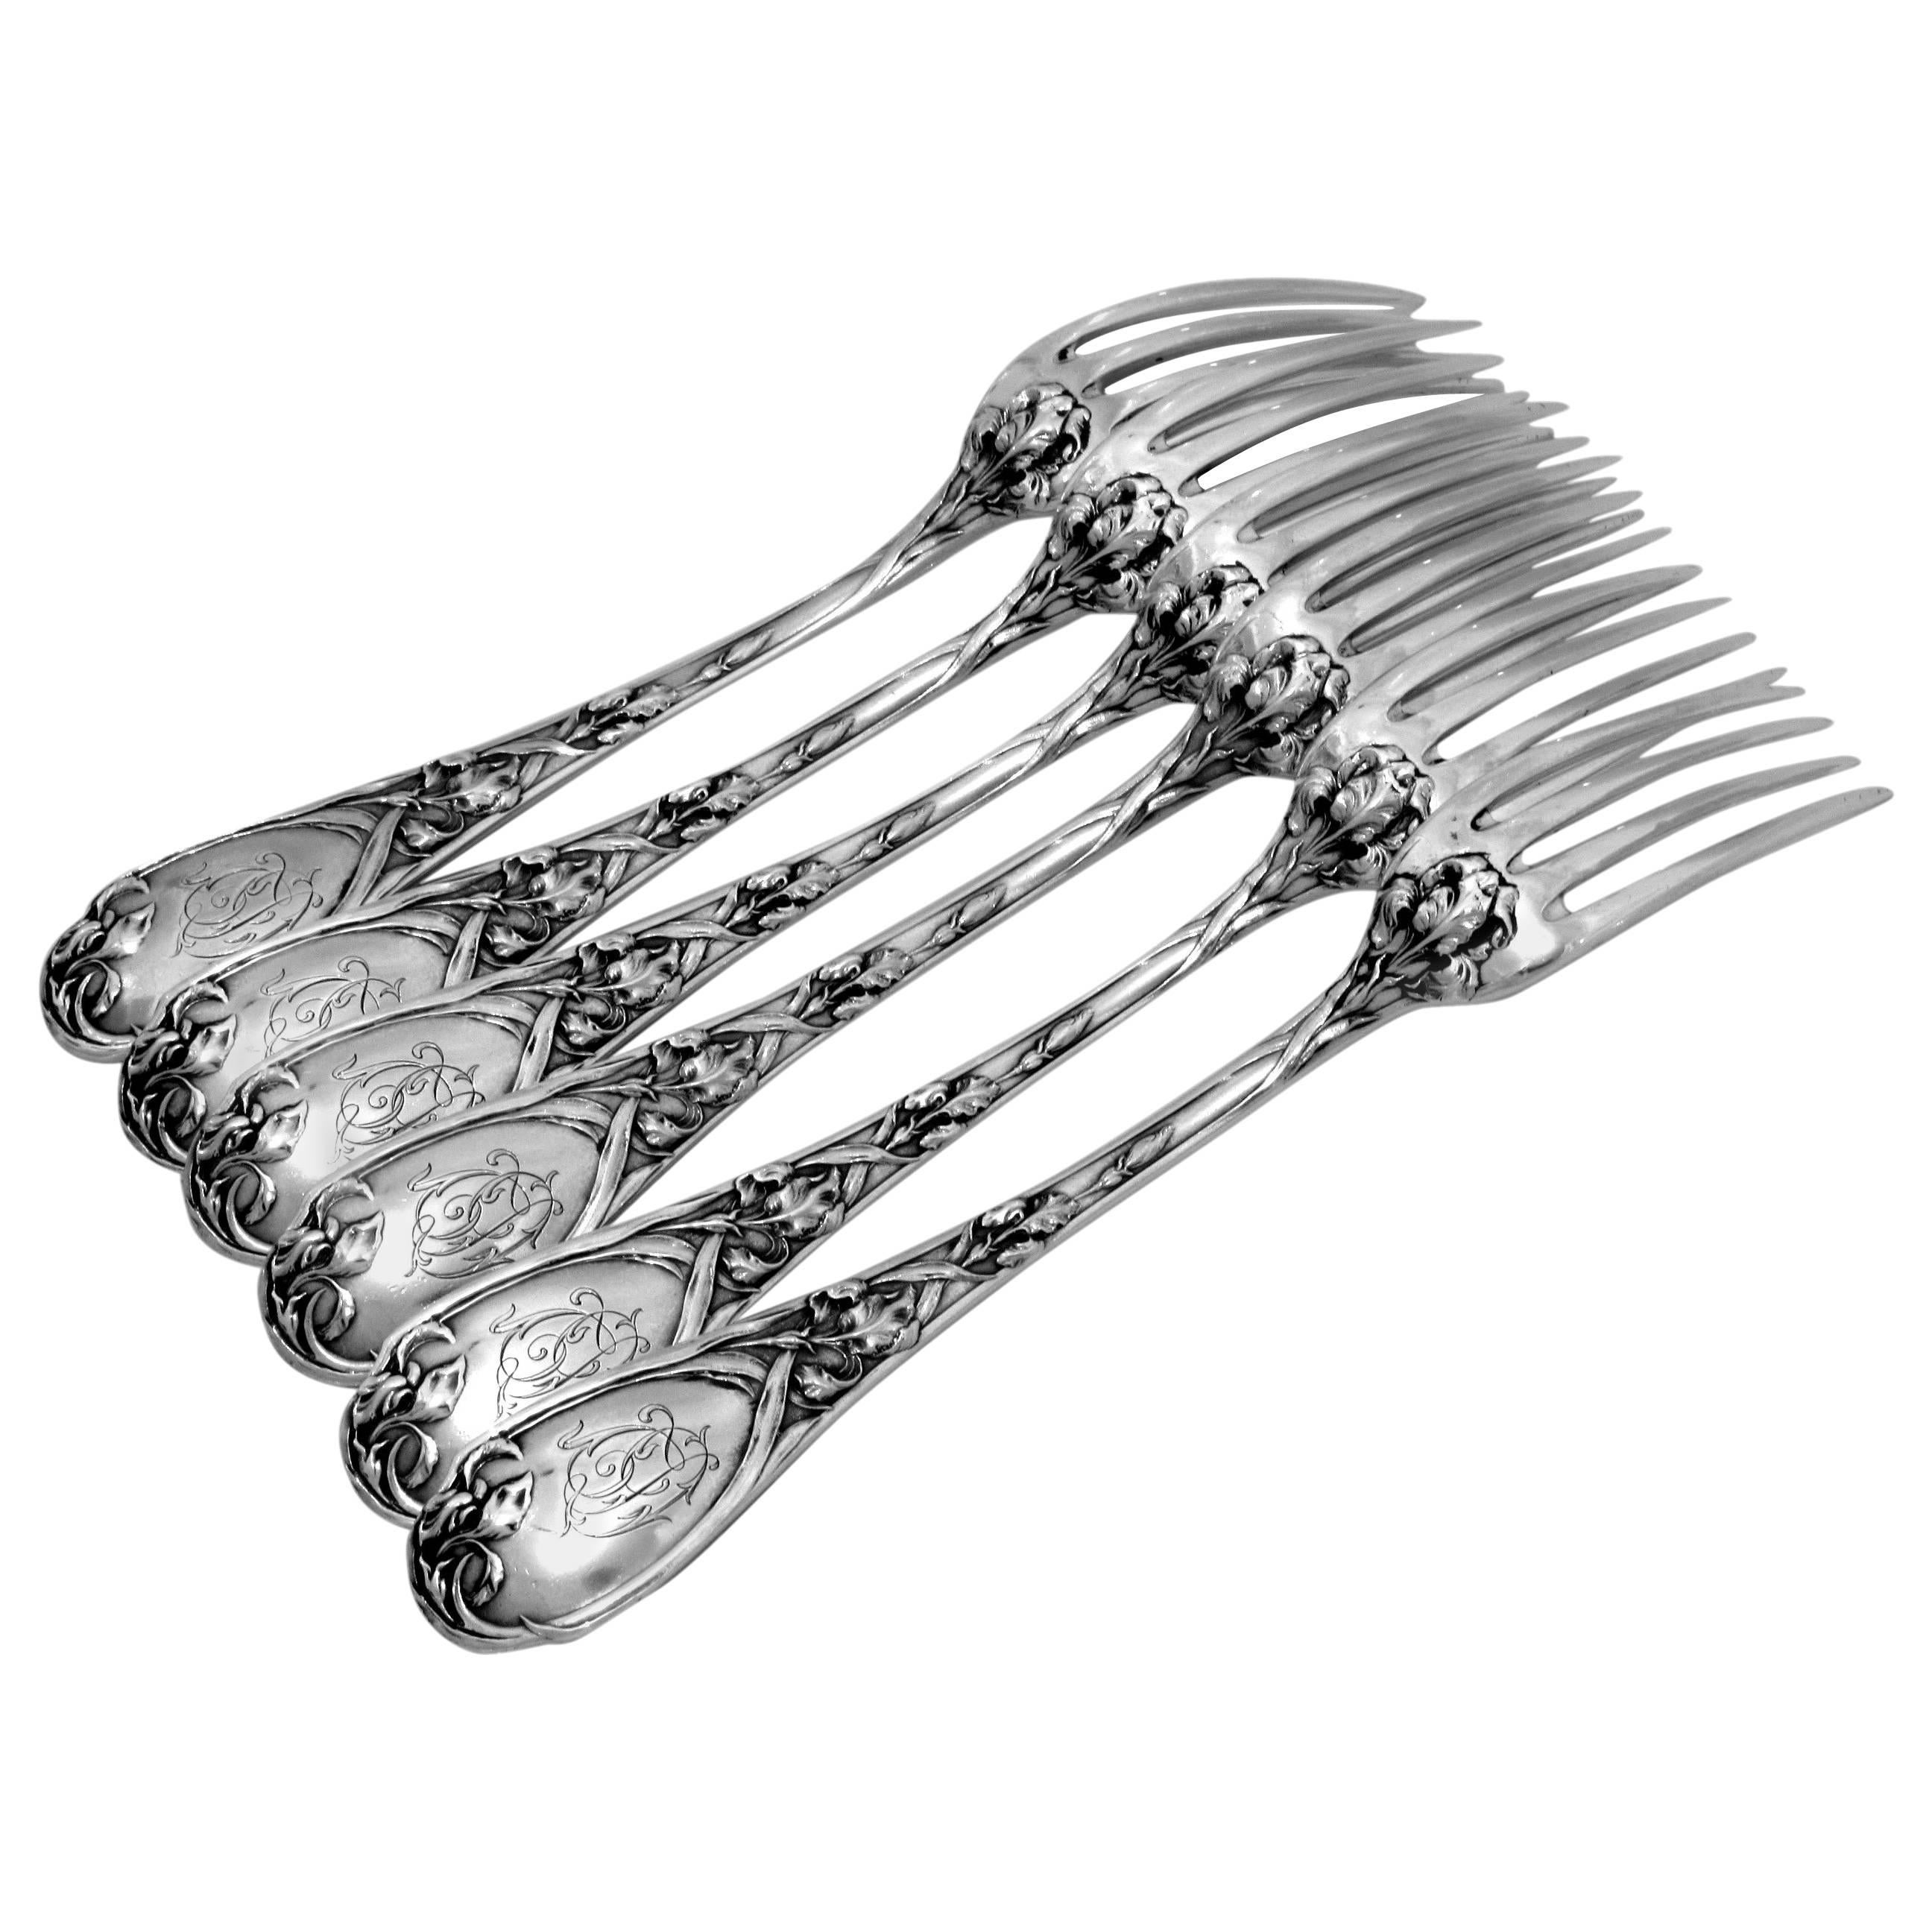 Puiforcat Fabulous French Sterling Silver Dinner Forks Set 6 pc Iris   For Sale